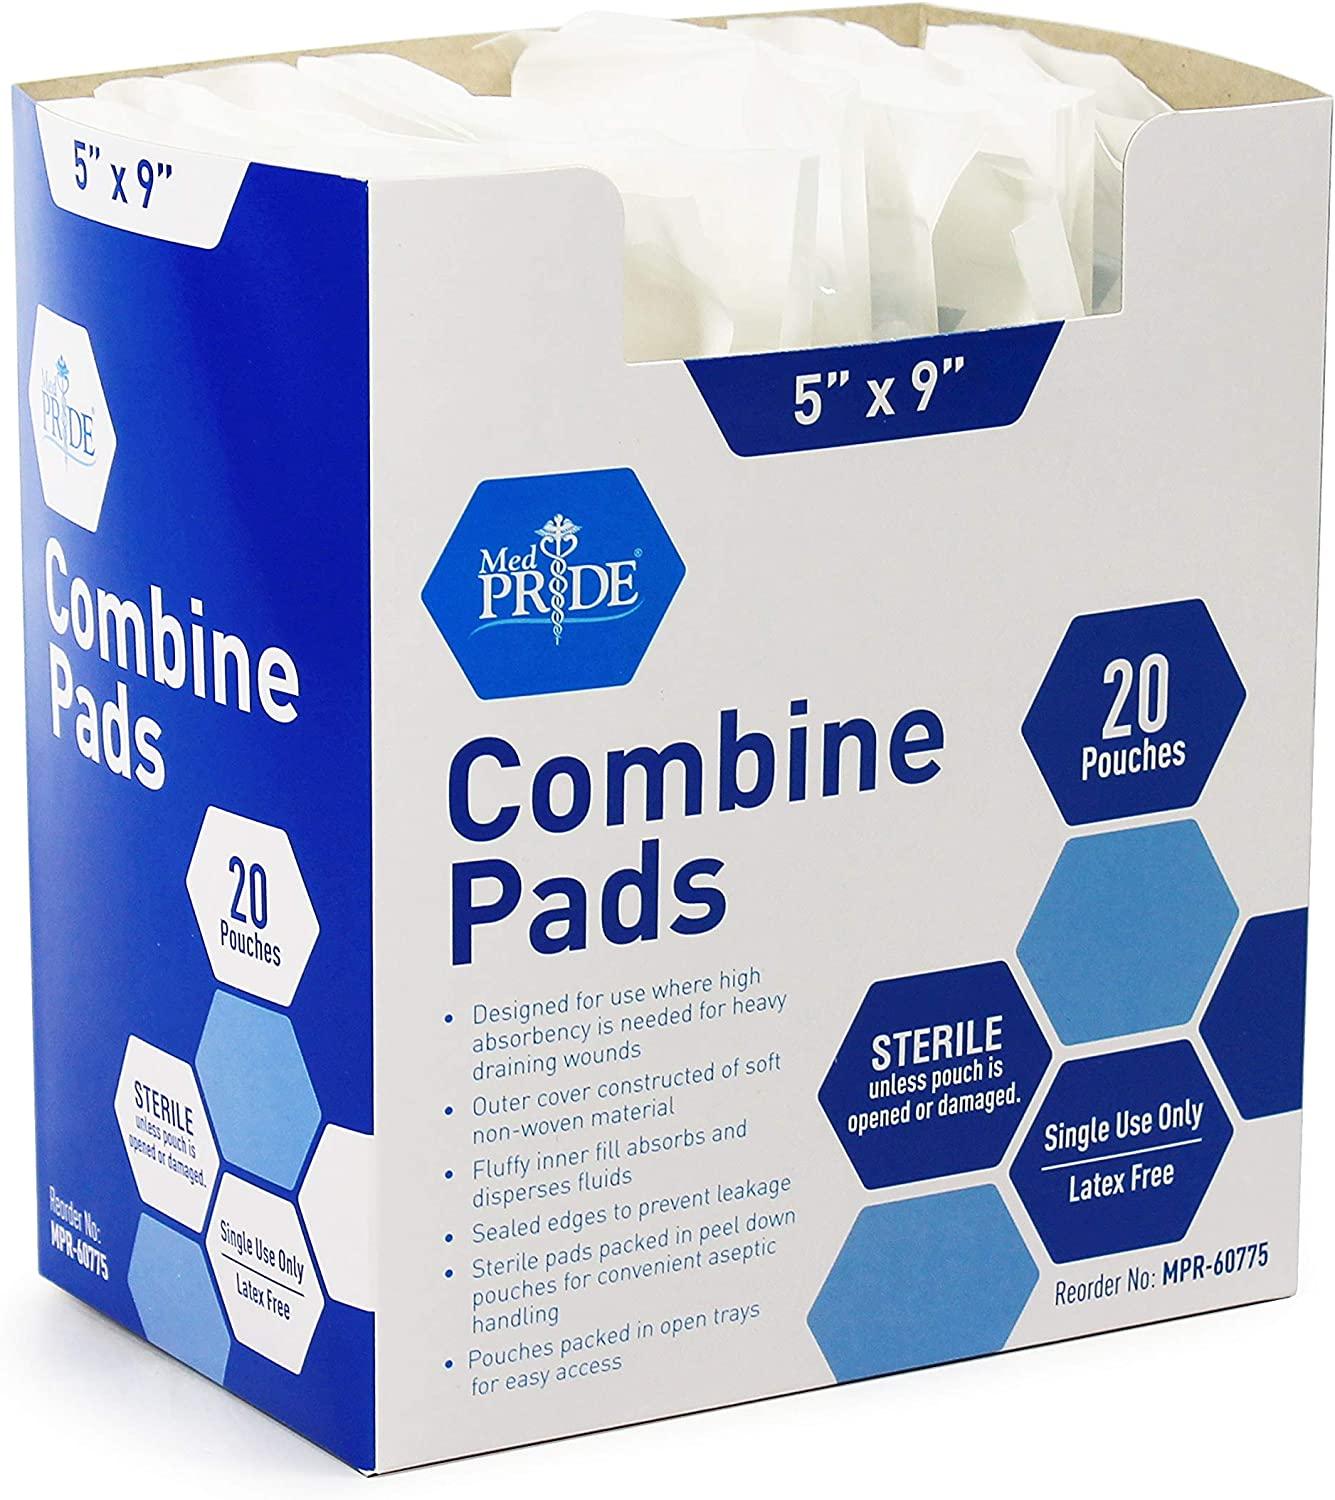 MED PRIDE Sterile XXtra Absorbent Abdominal Pads 50-Pack - 5x9 ABD Combine  Pads Individually Wrapped- Ultra-Absorbent Latex-Free & Non-Adherent  Surgical Pads for Drainage, Post-Op, Wound Dressing